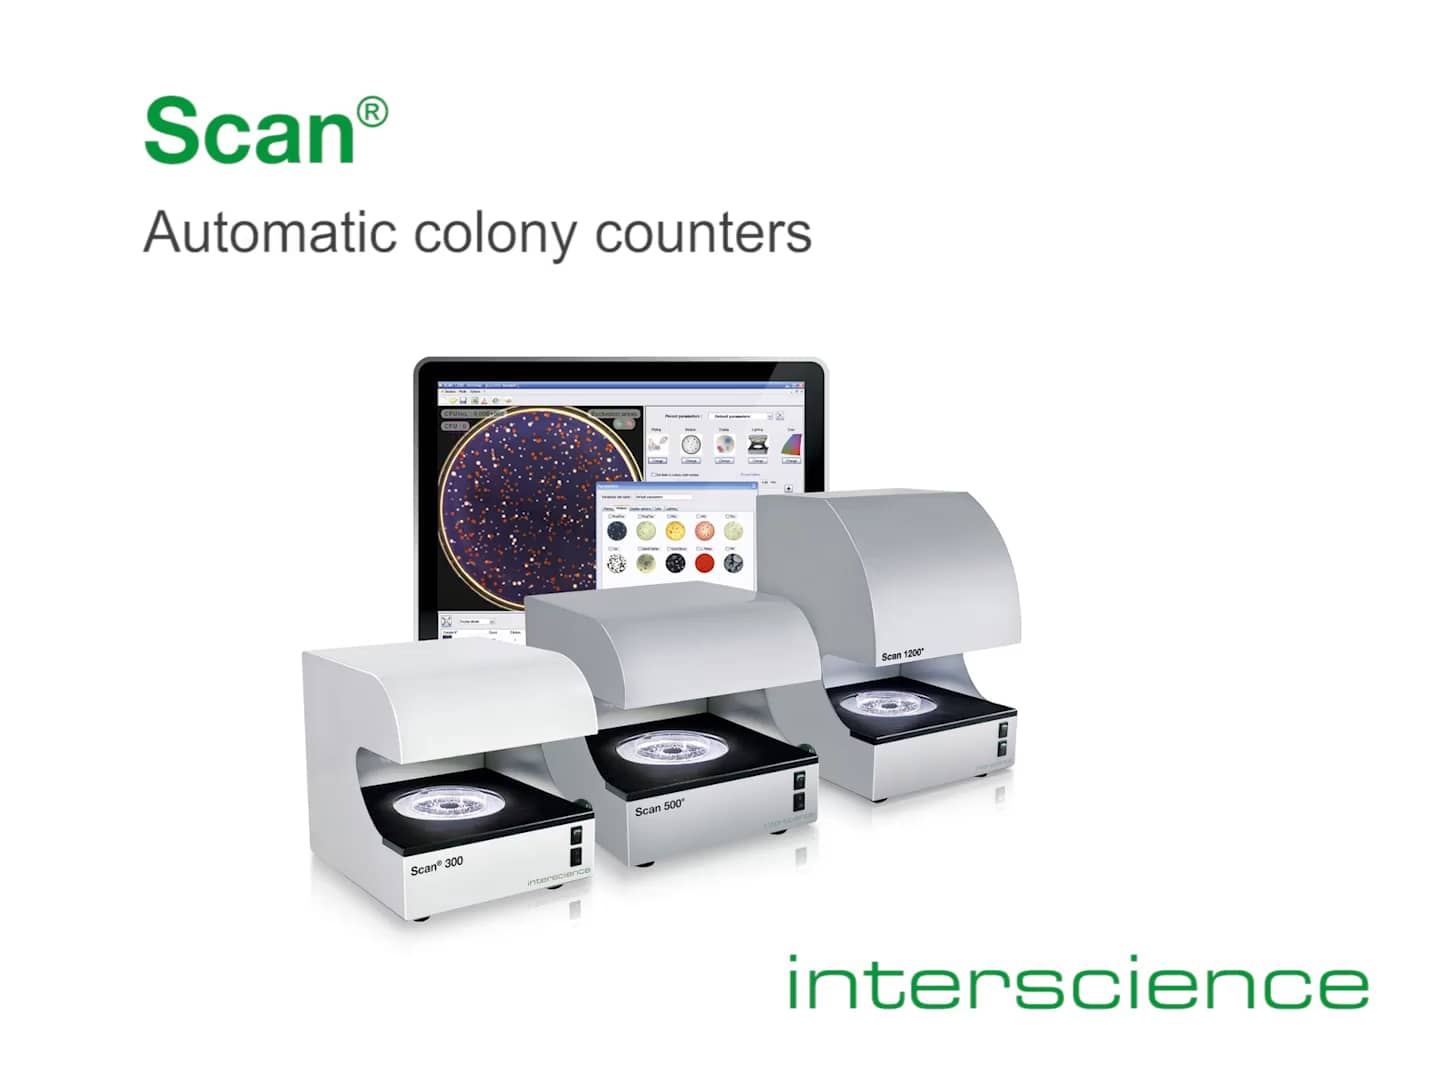 Interscience 300 Automatic Colony Counter